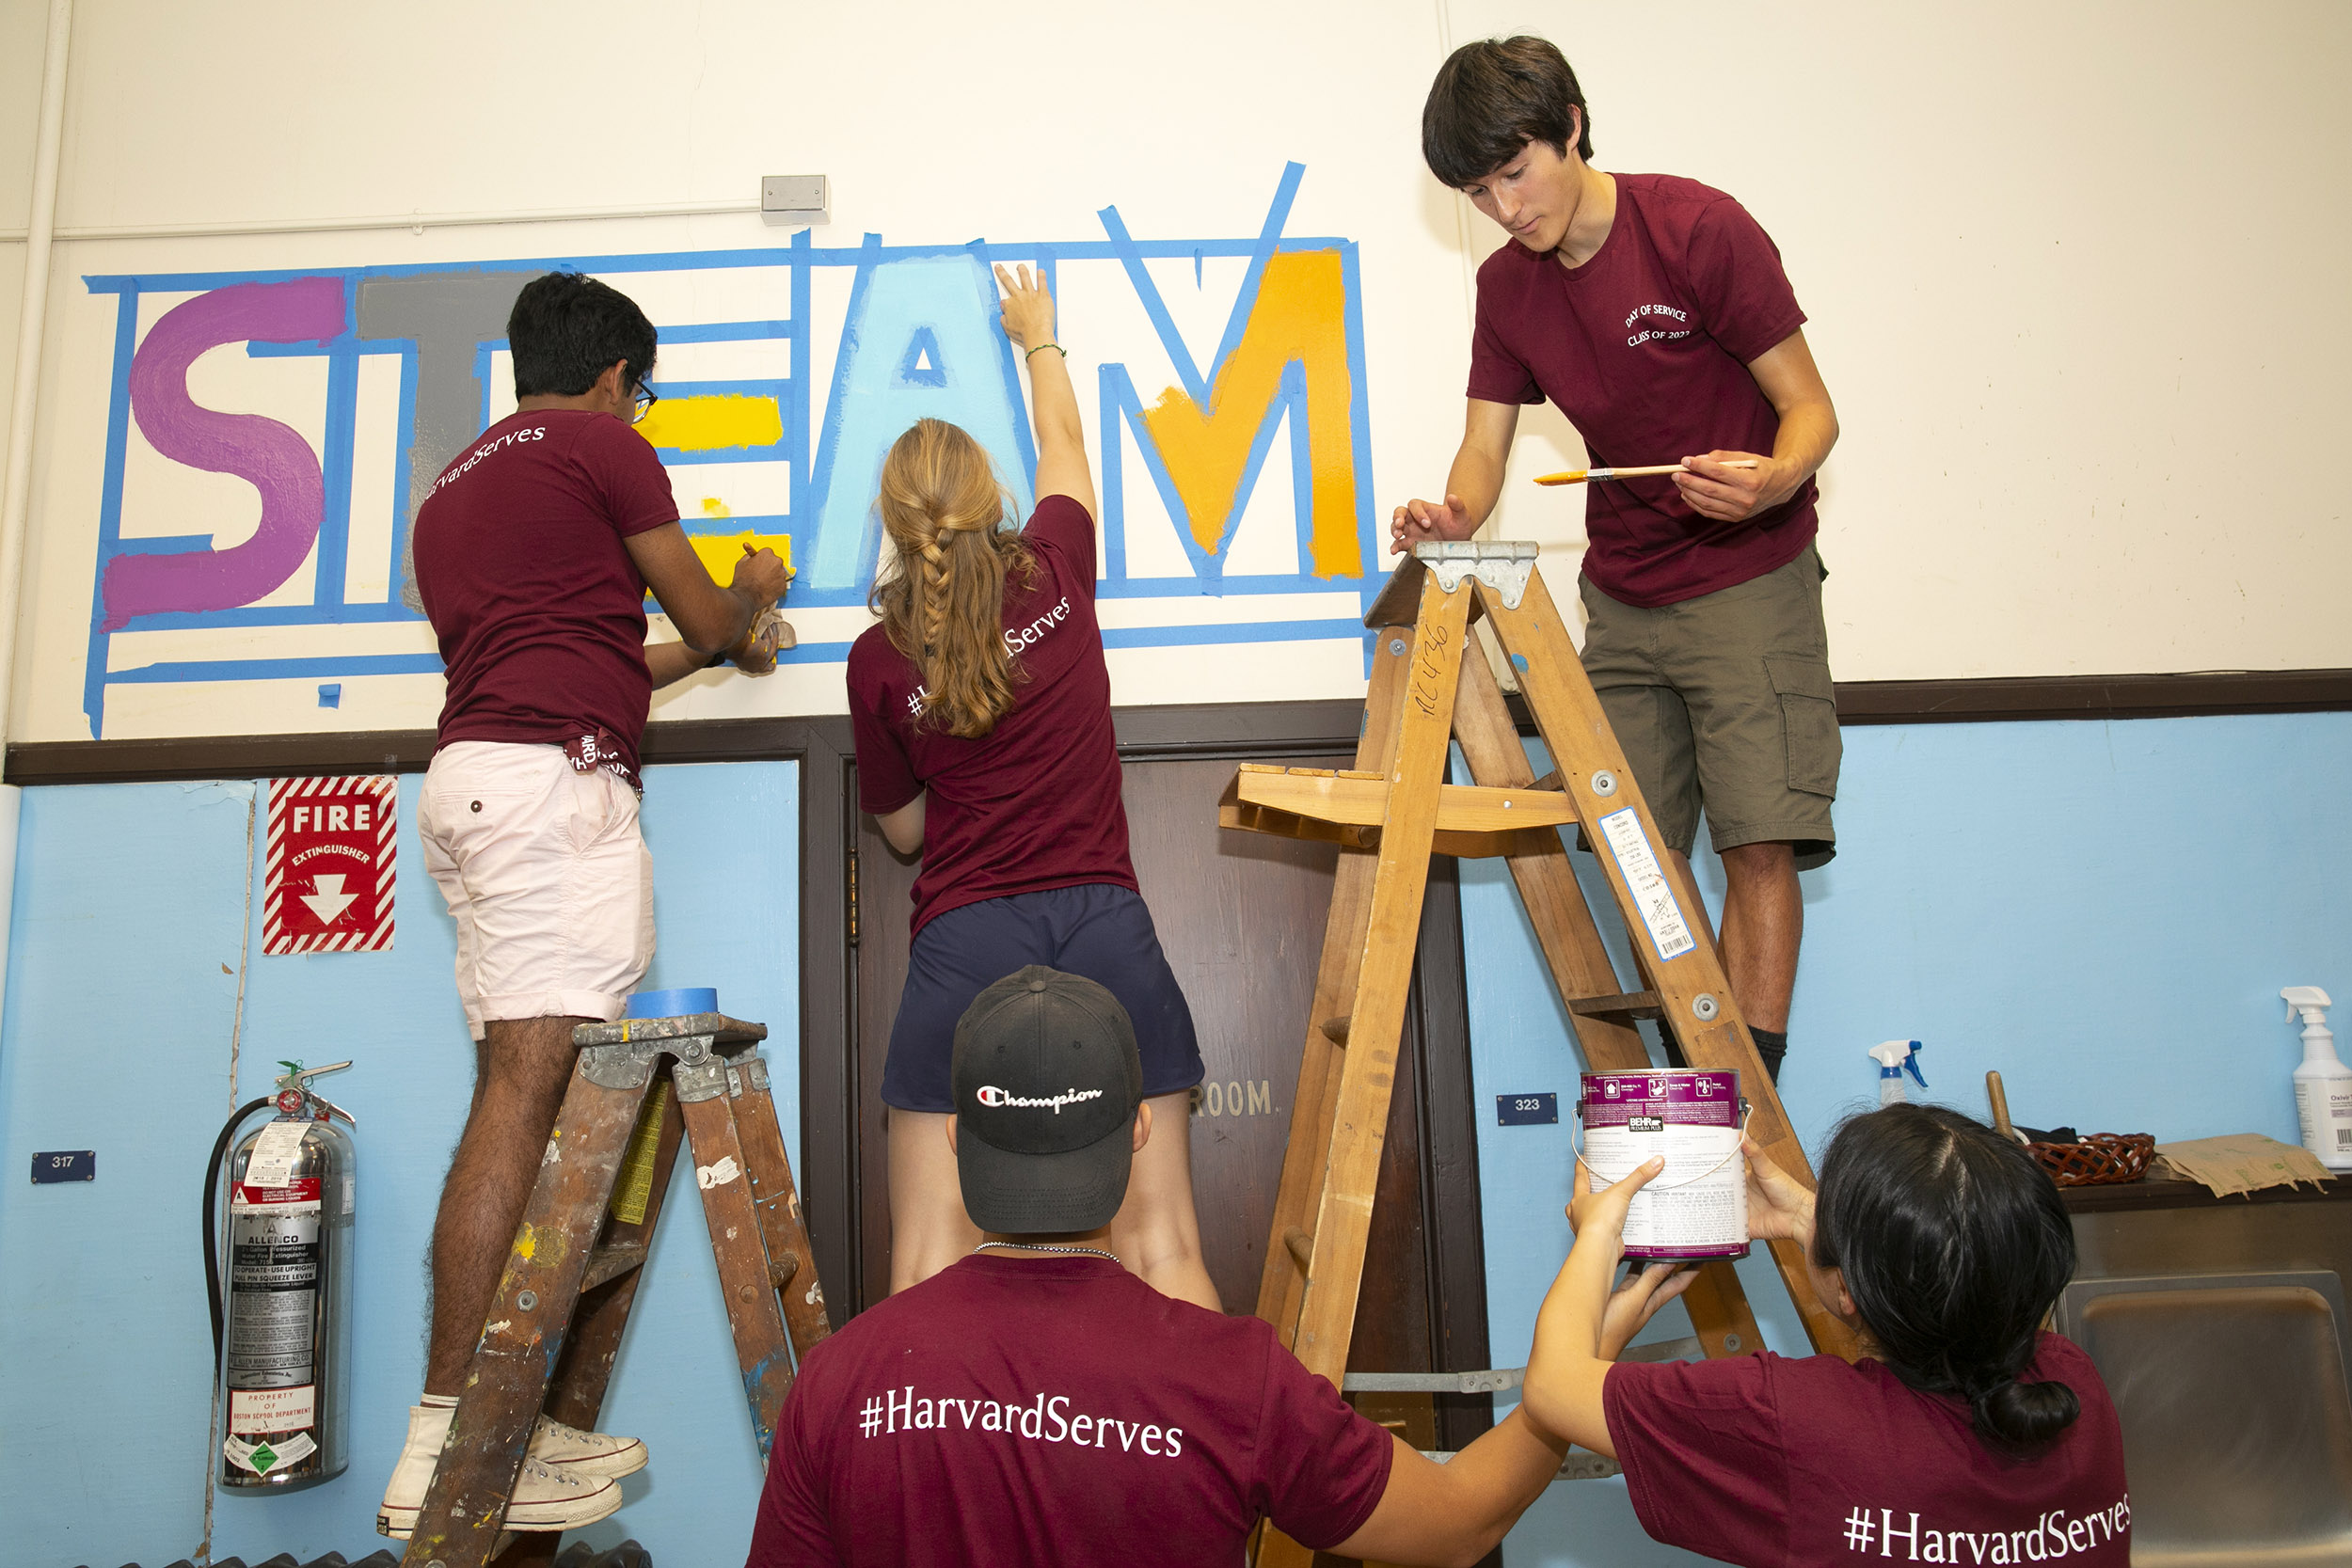 Students painting inside a gym